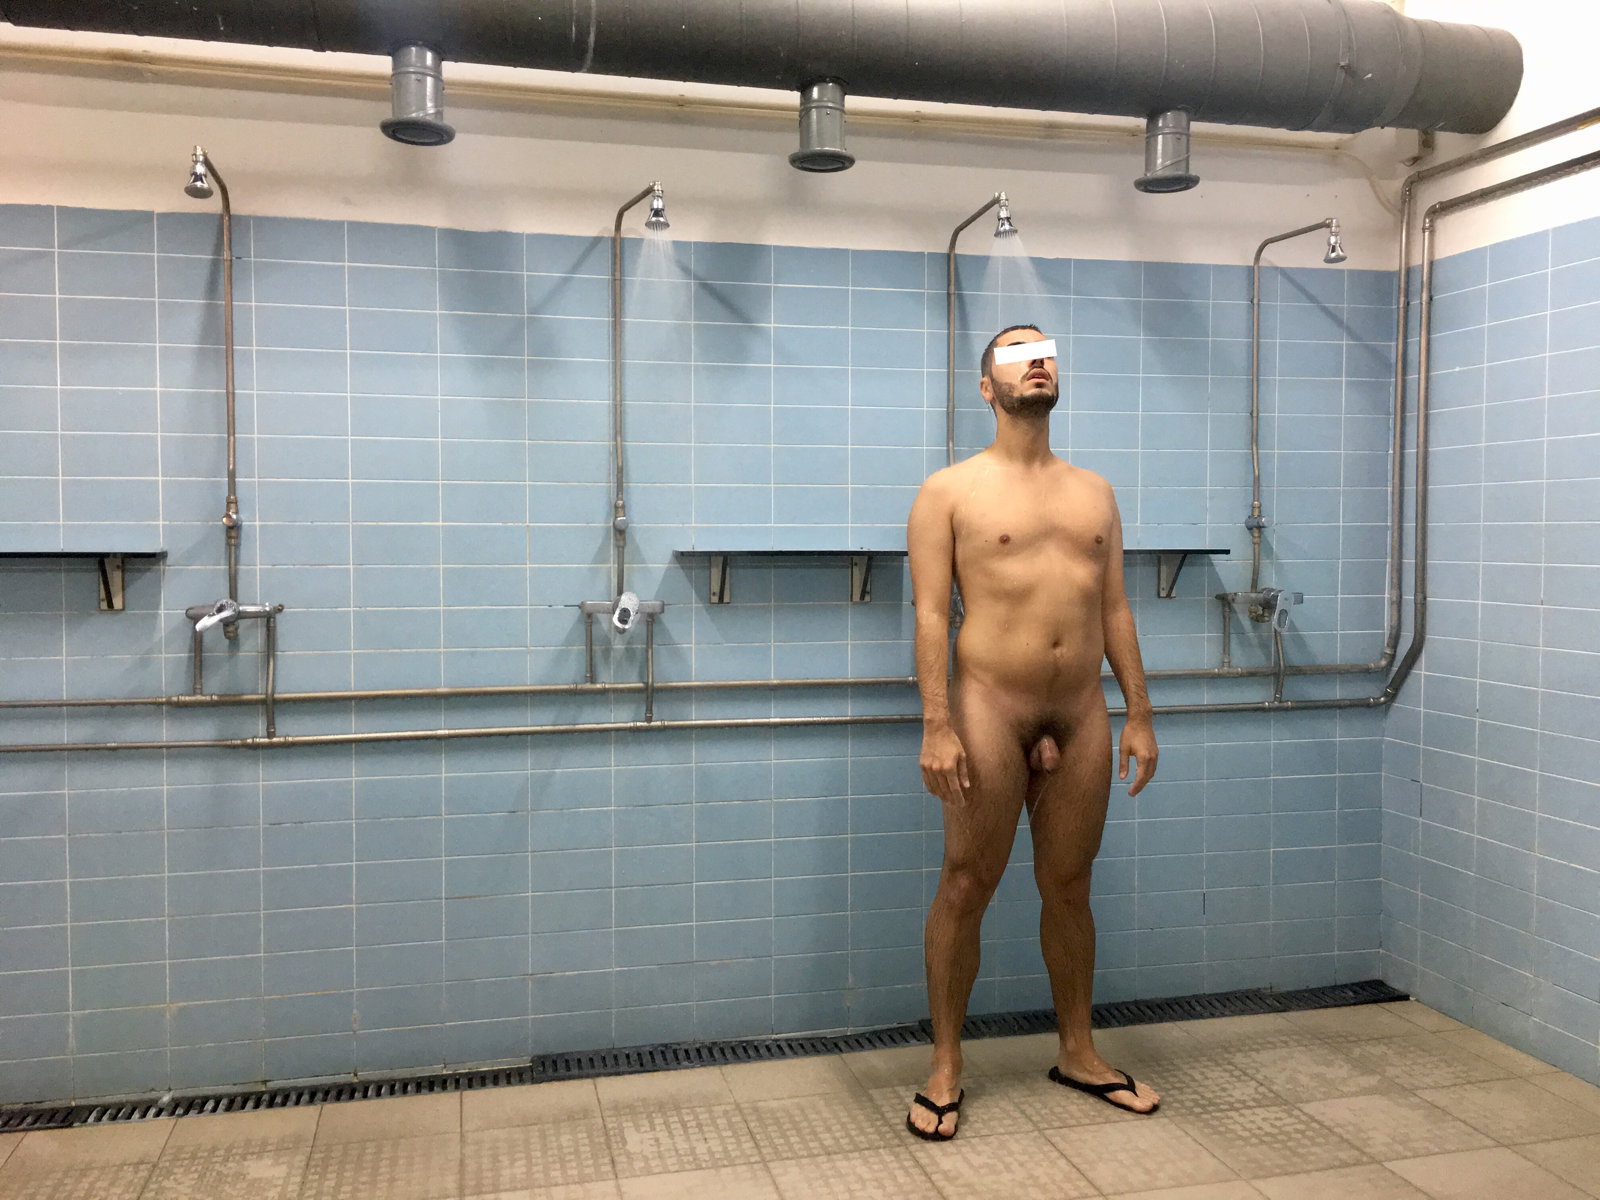 Watch the Photo by Fan in Heat with the username @faninheat, who is a verified user, posted on April 19, 2019. The post is about the topic Gay. and the text says 'Rub, rub, rub
#gay #shower'